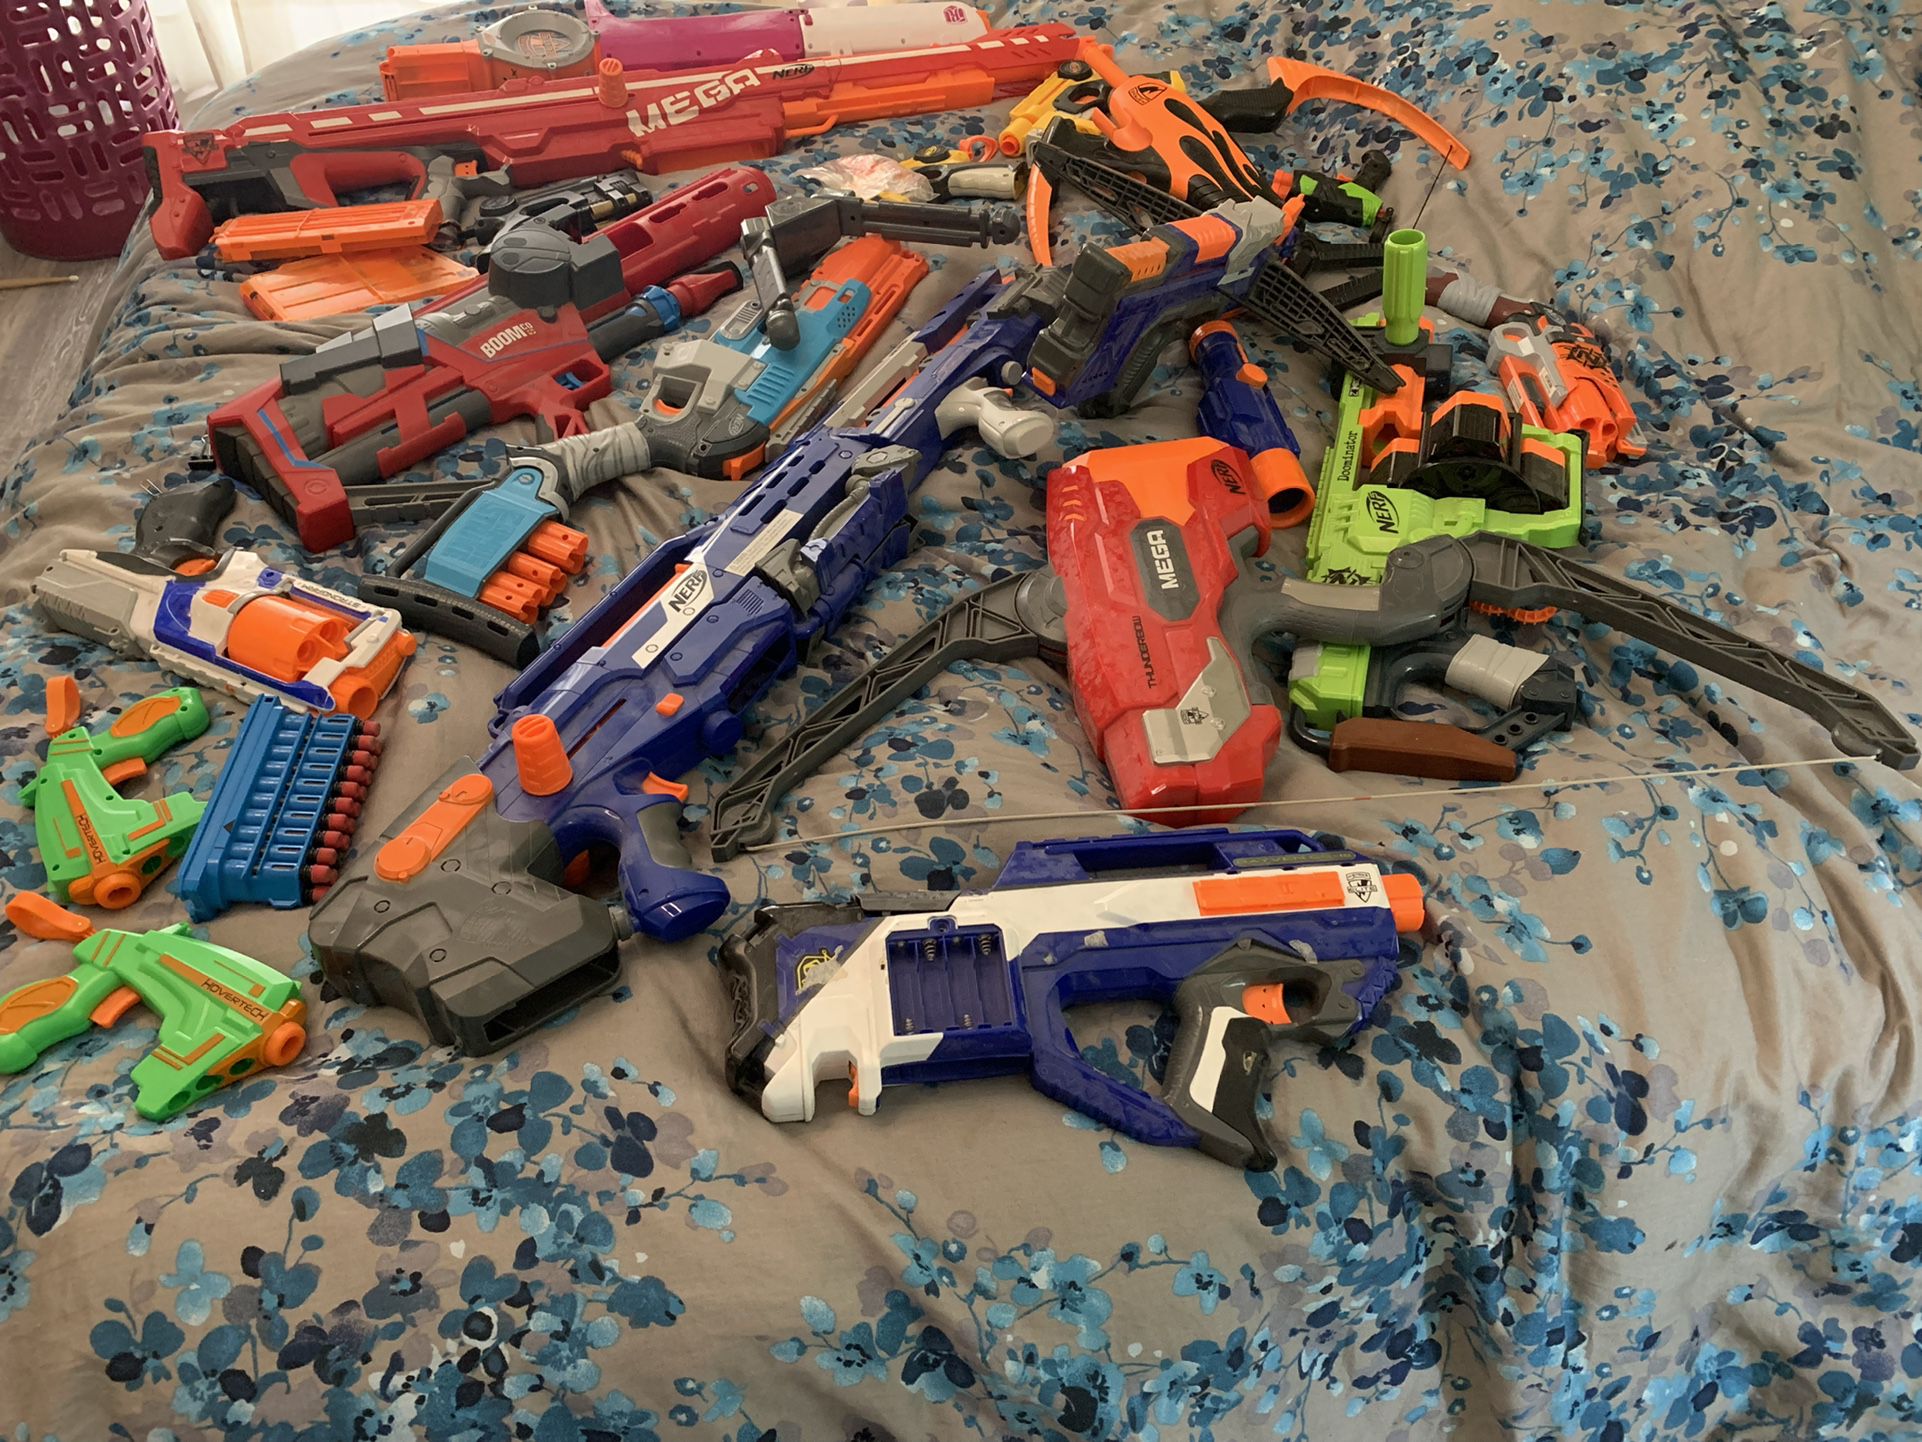 Nerf Roblox Adopt Me! Blaster for Sale in Irvine, CA - OfferUp